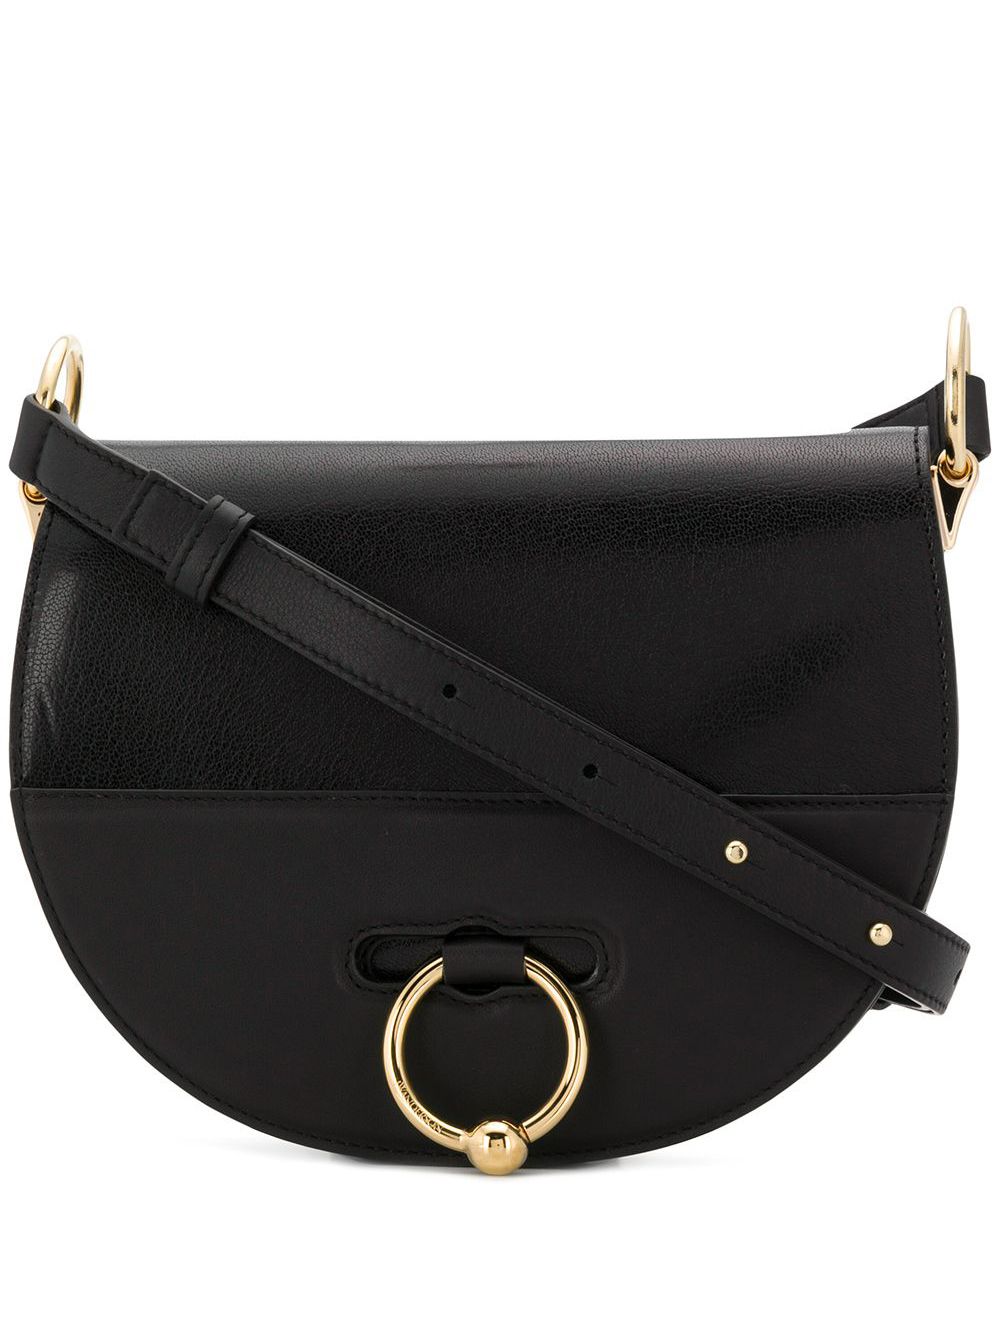 Image 1 of JW Anderson Latch bag